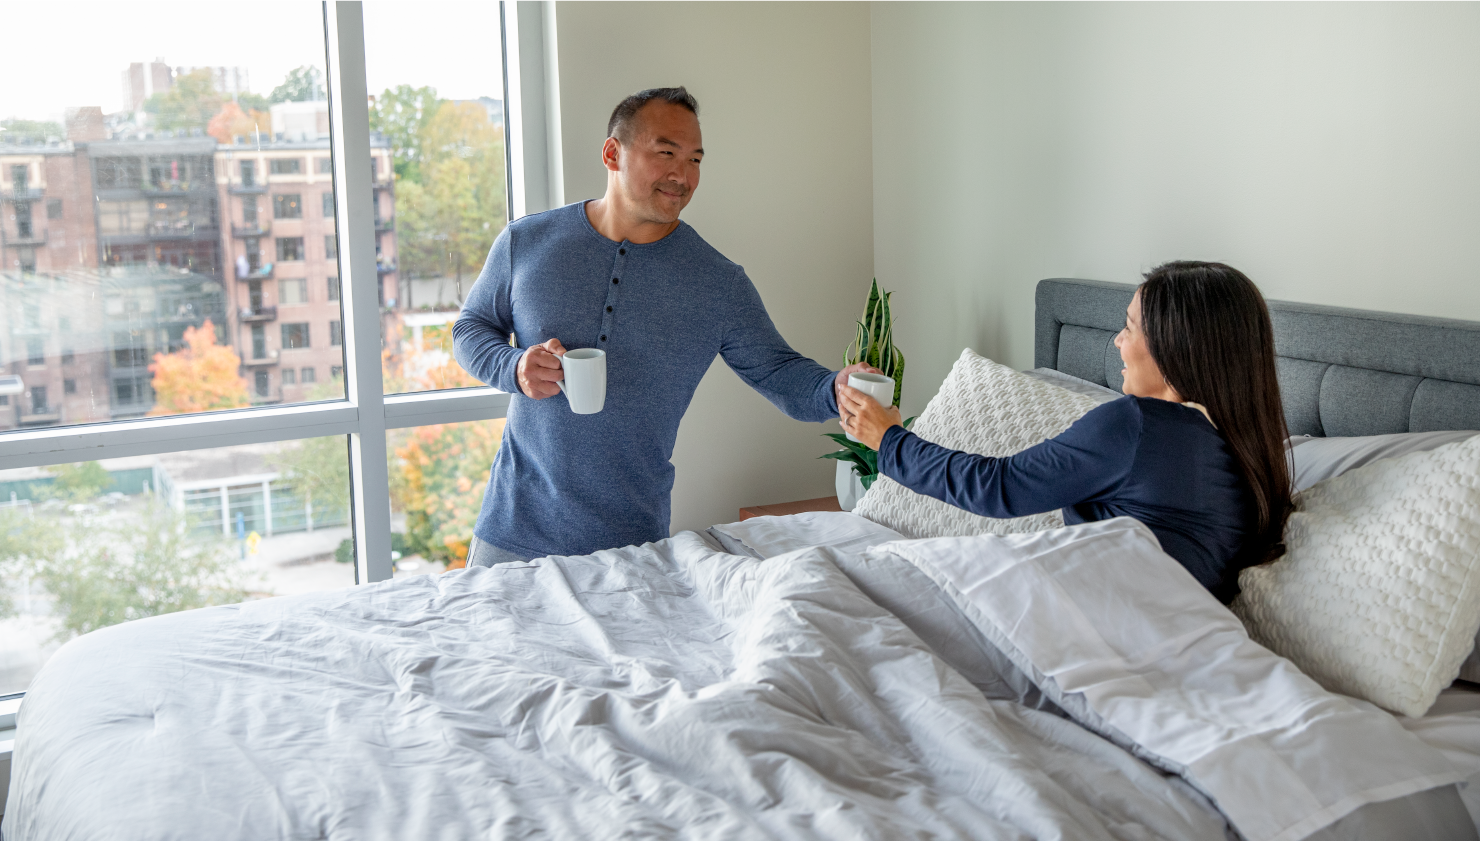 Man handing woman in bed a cup of coffee